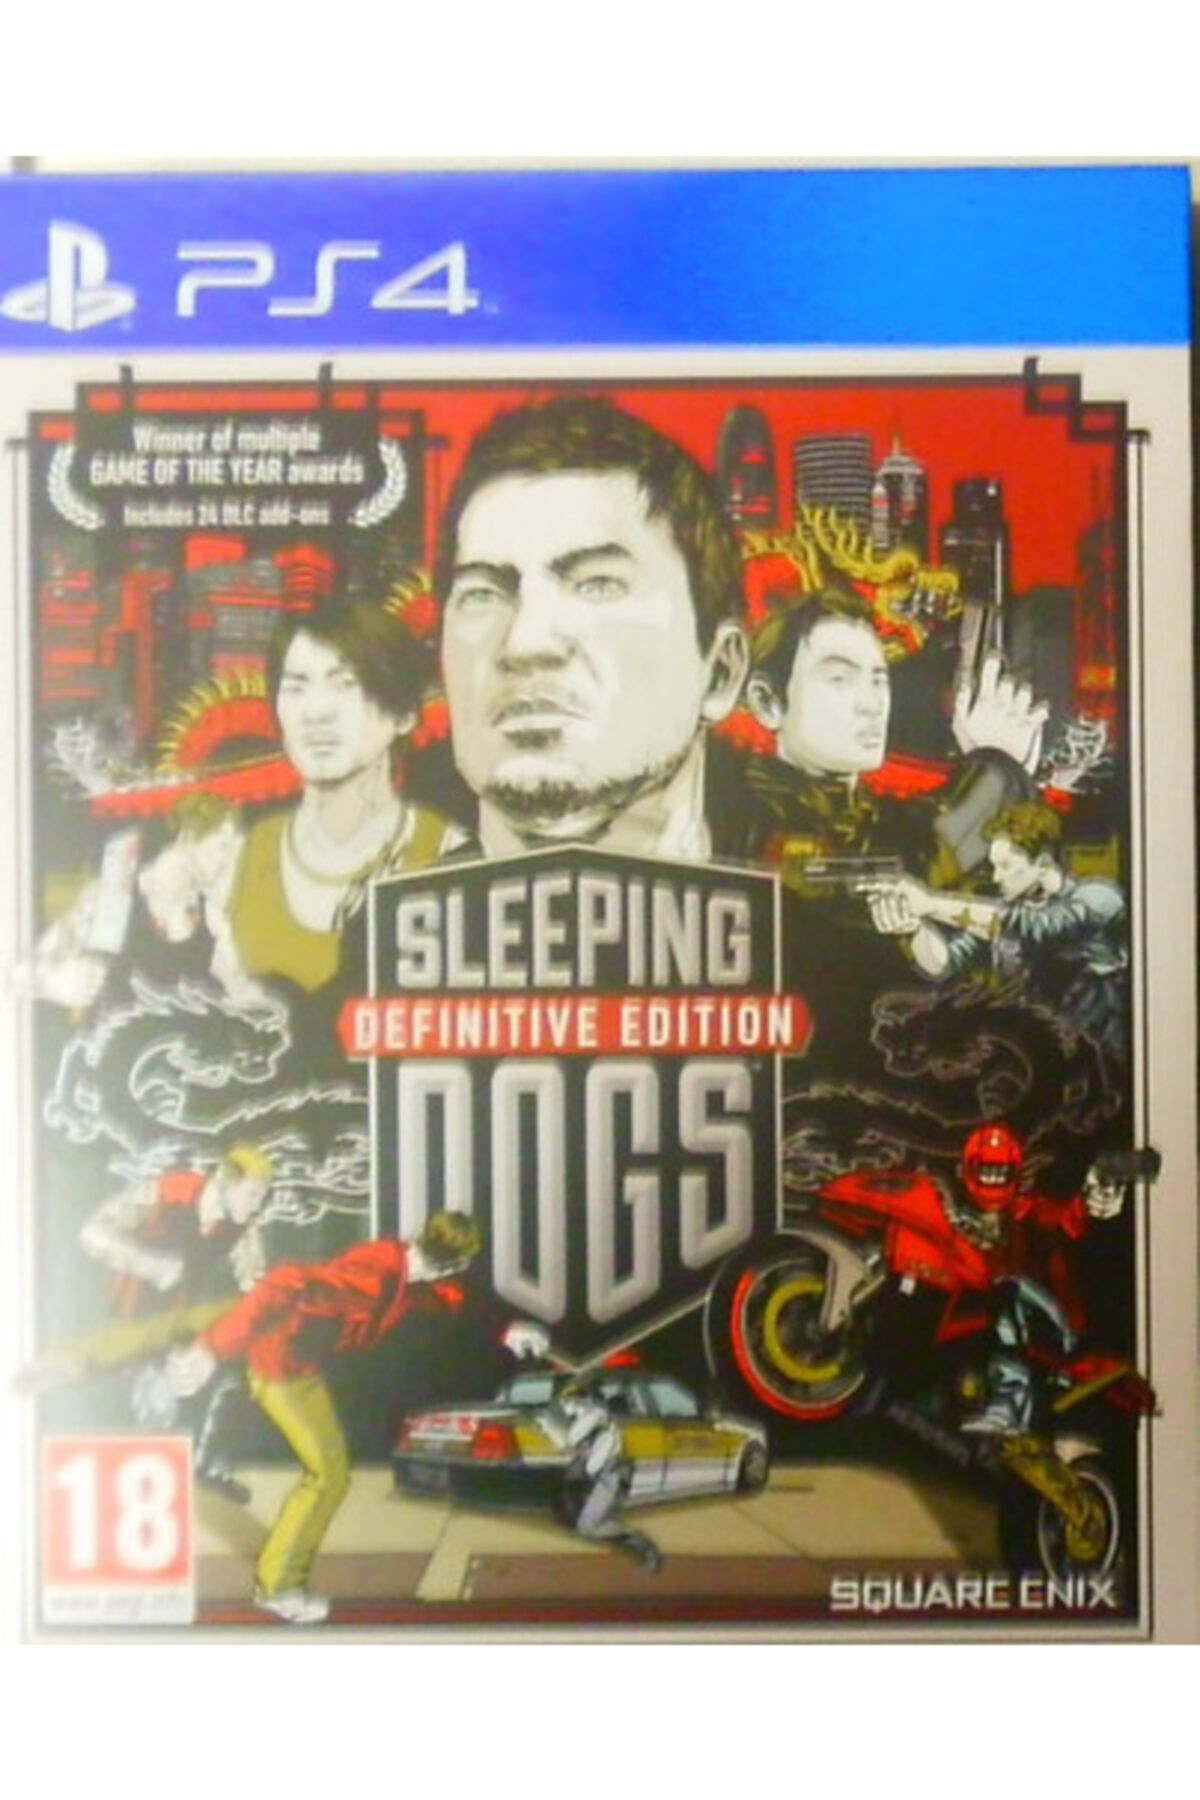 Square Enix Sleeping Dogs Ps4